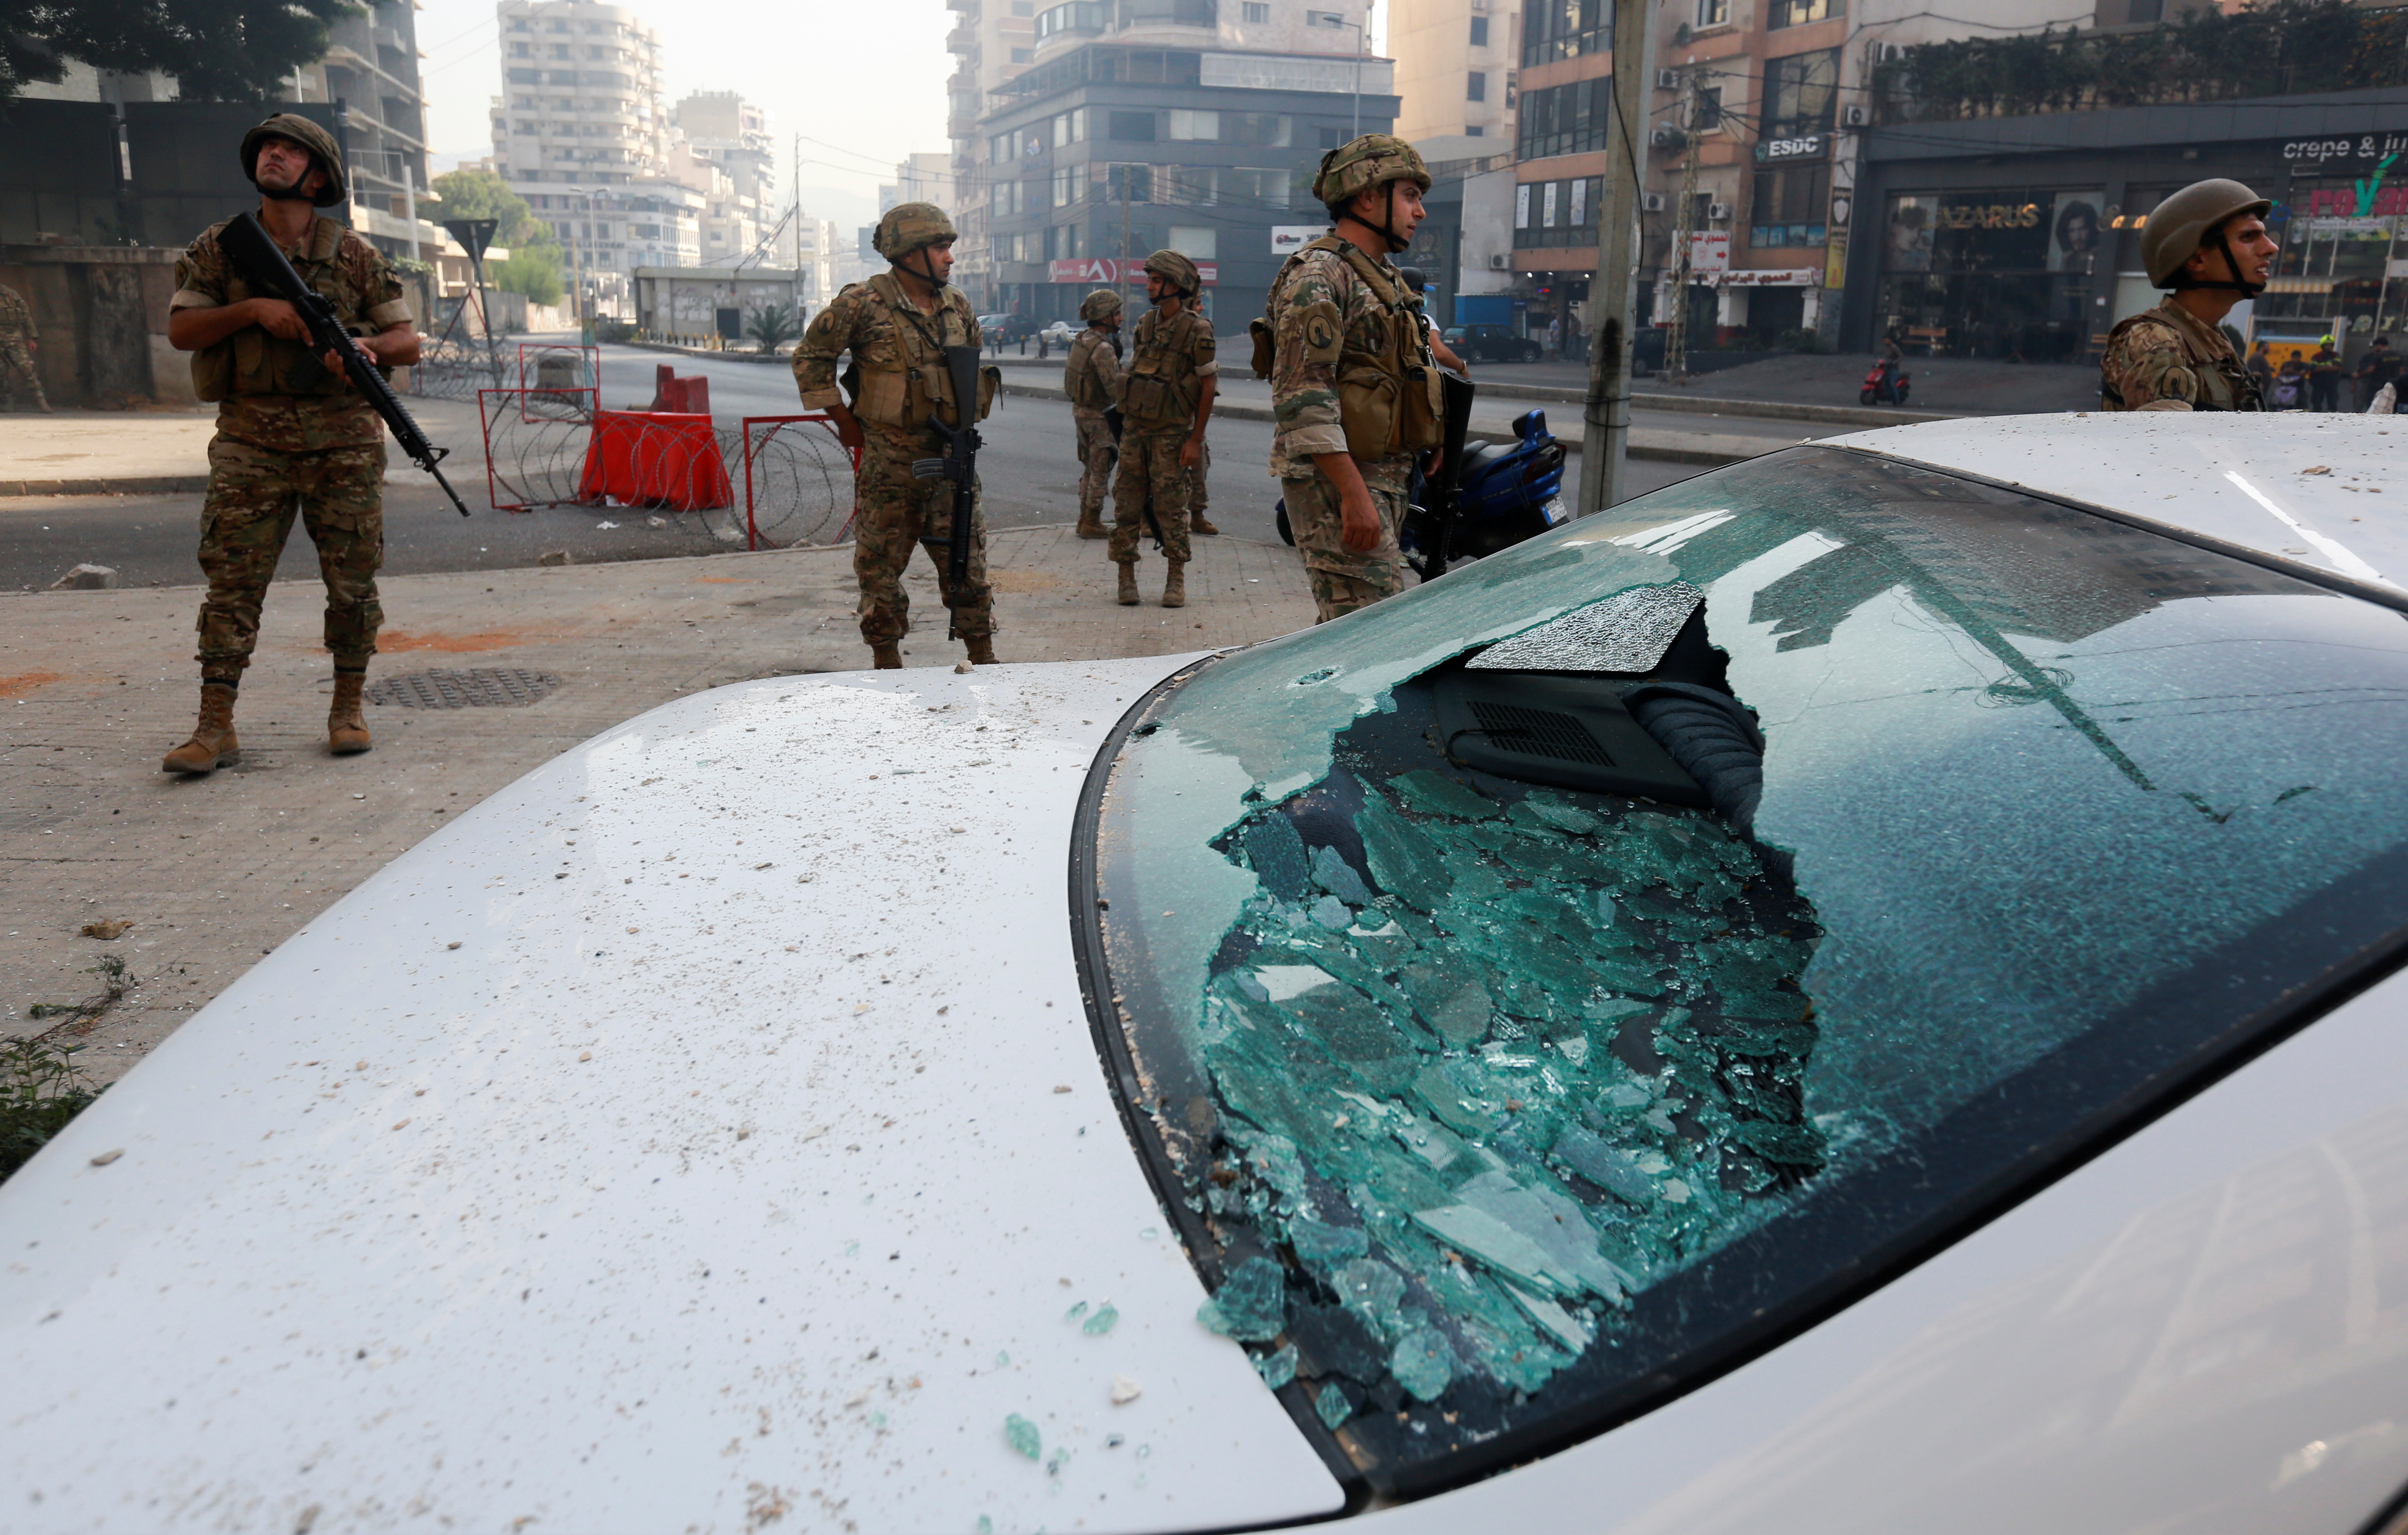 A damaged vehicle is pictured as soldiers are deployed after gunfire erupted in Beirut, Lebanon October 14, 2021. REUTERS/Aziz Taher